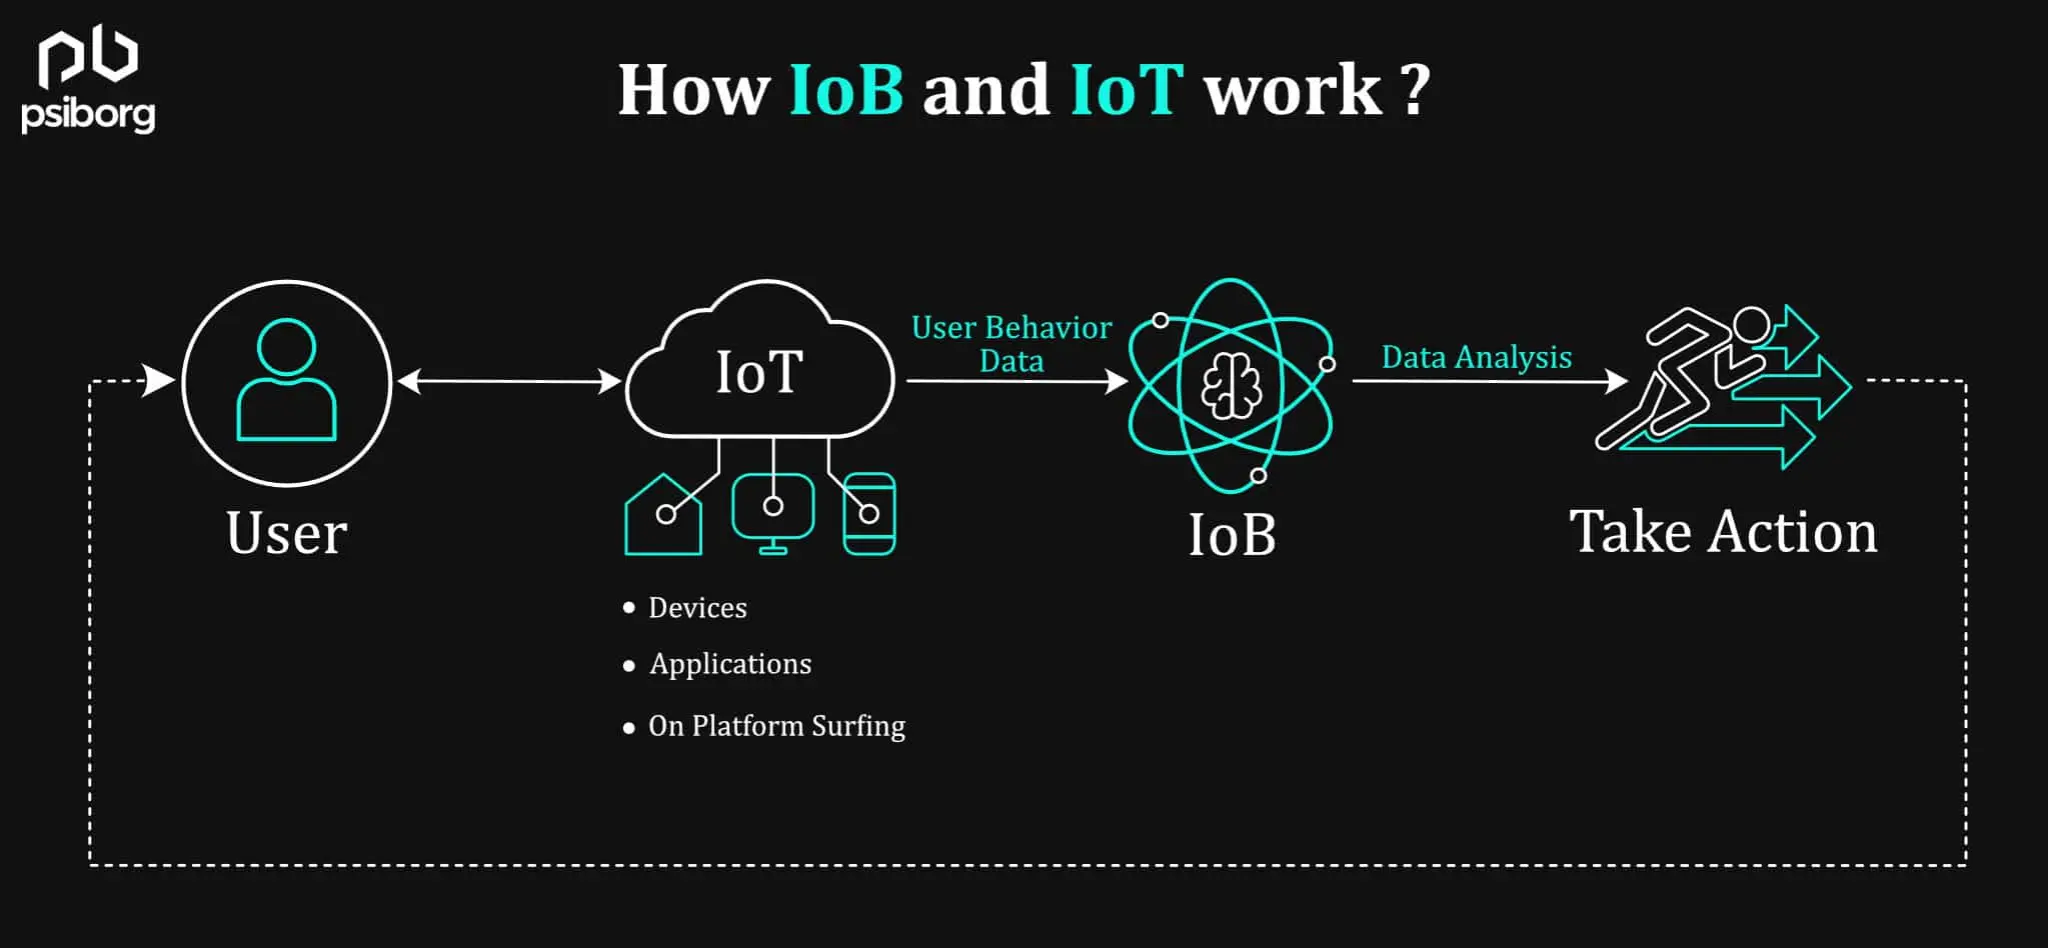 iob differ from iot